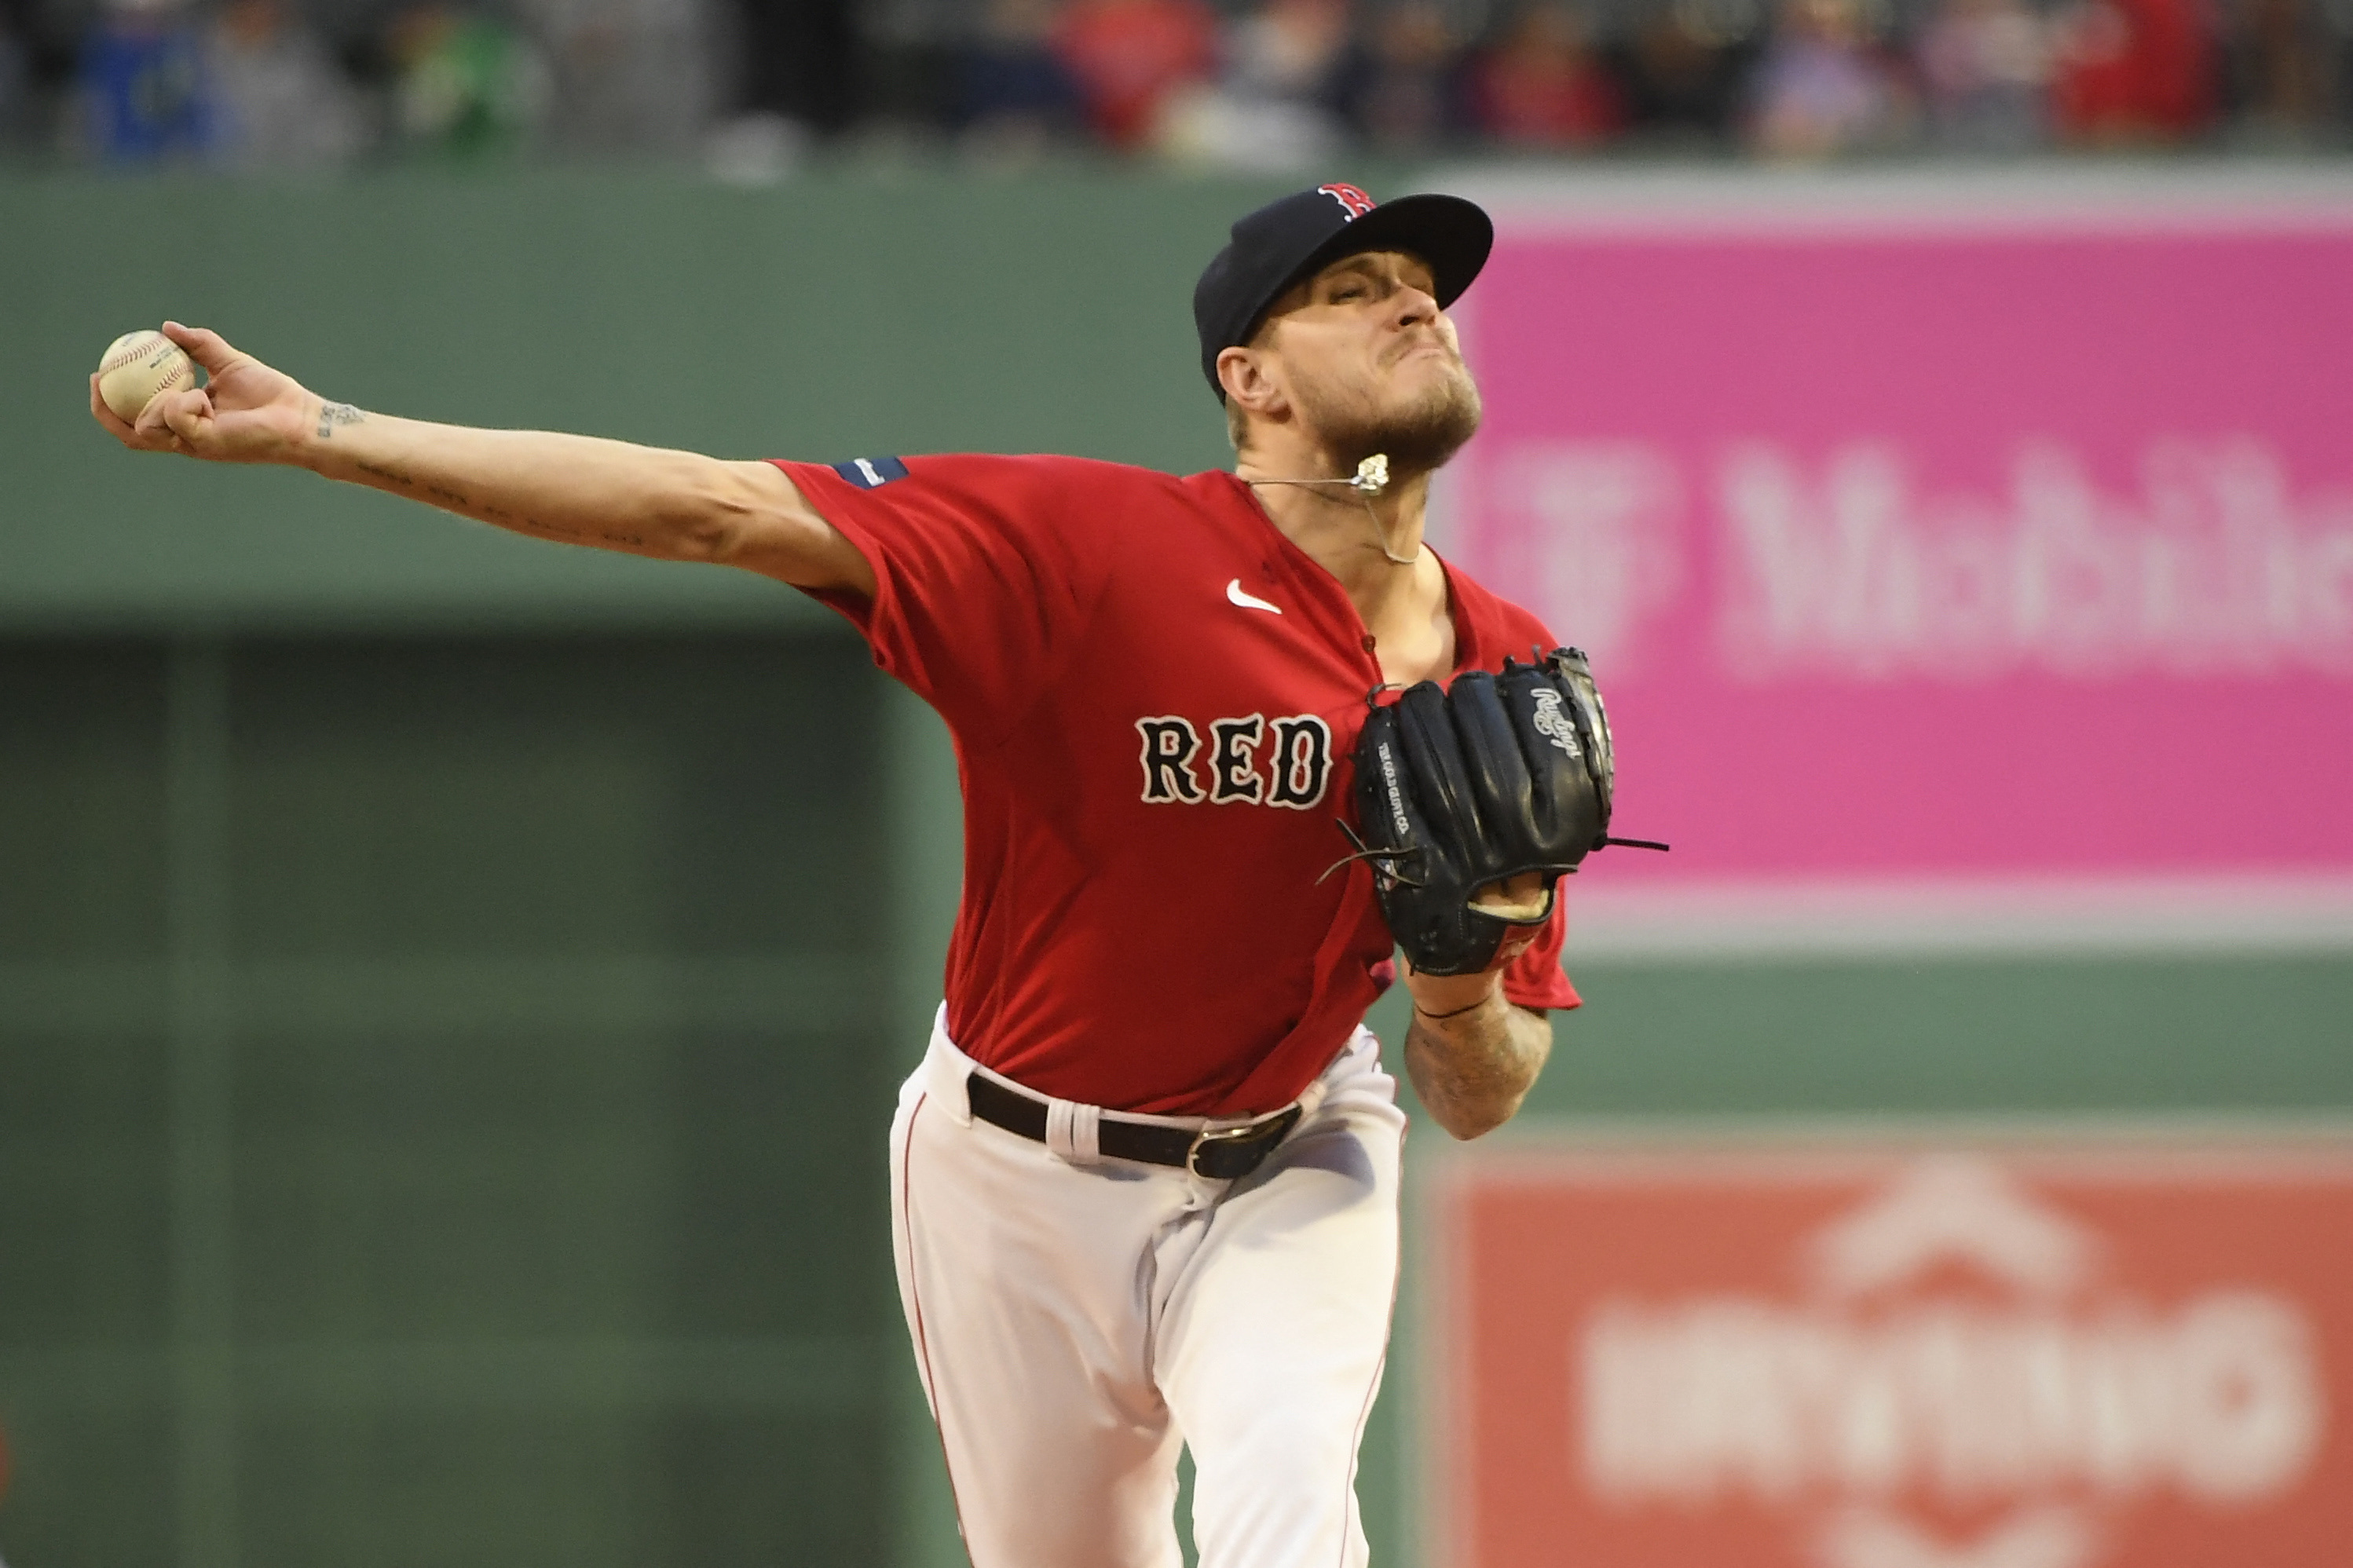 After Jays' 6-run inning, Red Sox storm back for win